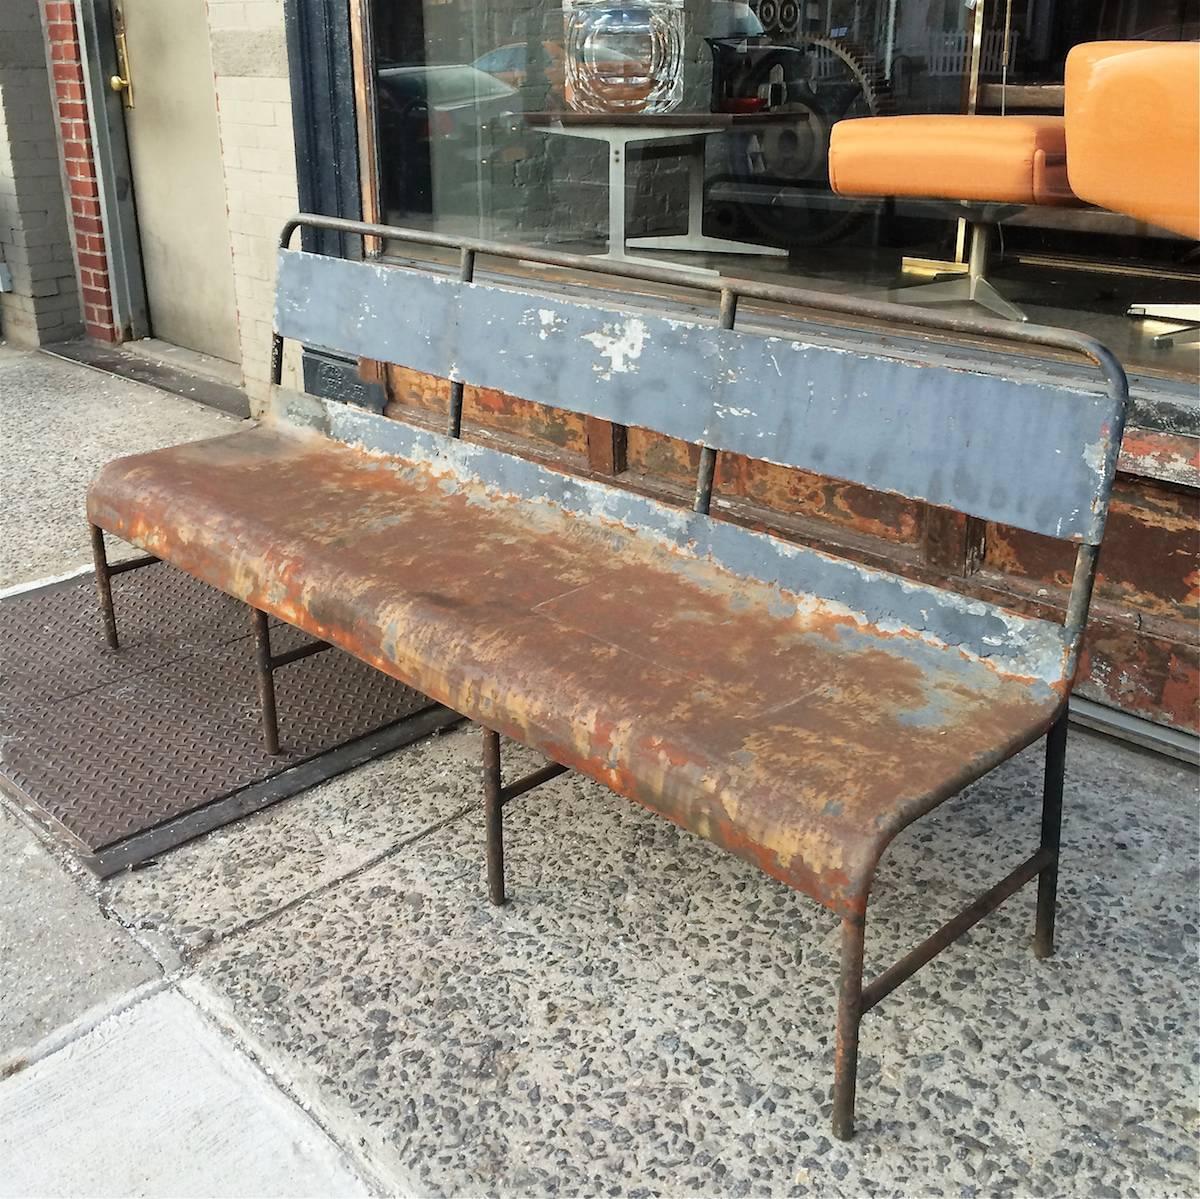 Painted steel, navy ship bench is structurally intact and weathered in a fantastic, rustic industrial patina.